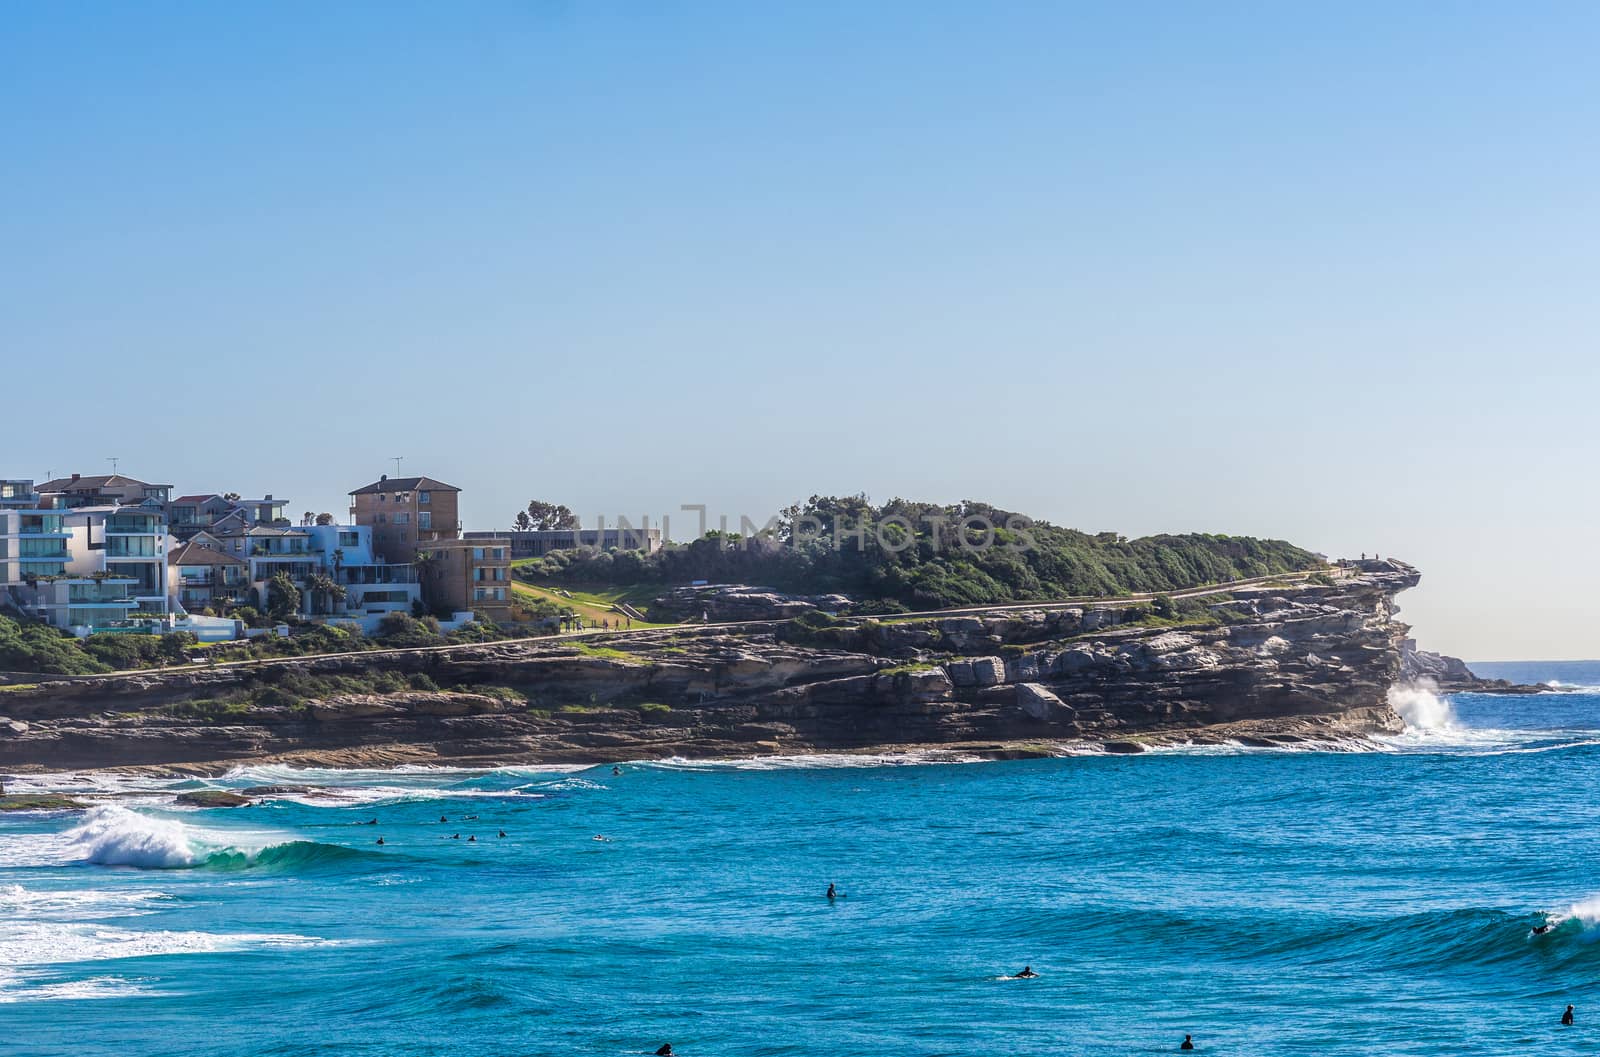 North cliff of Bronte Beach seen from South shore cliffs, Sydney by Claudine